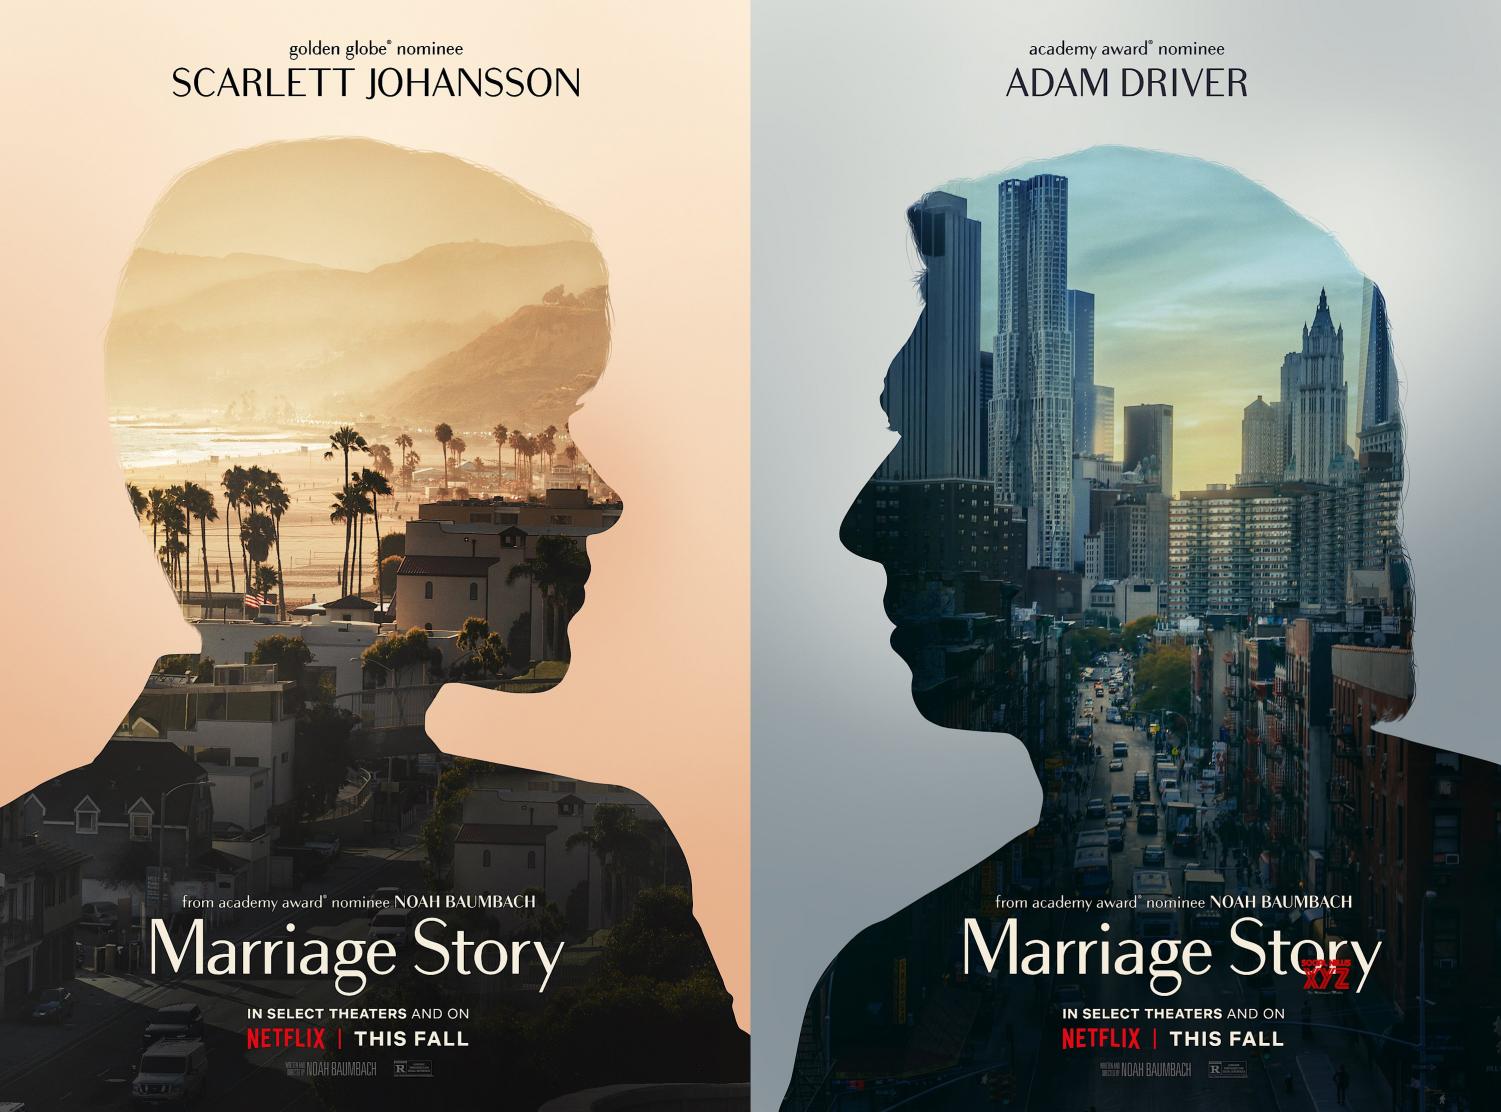 The official movie poster for Marriage Story, which came to Netflix US on Dec. 6.